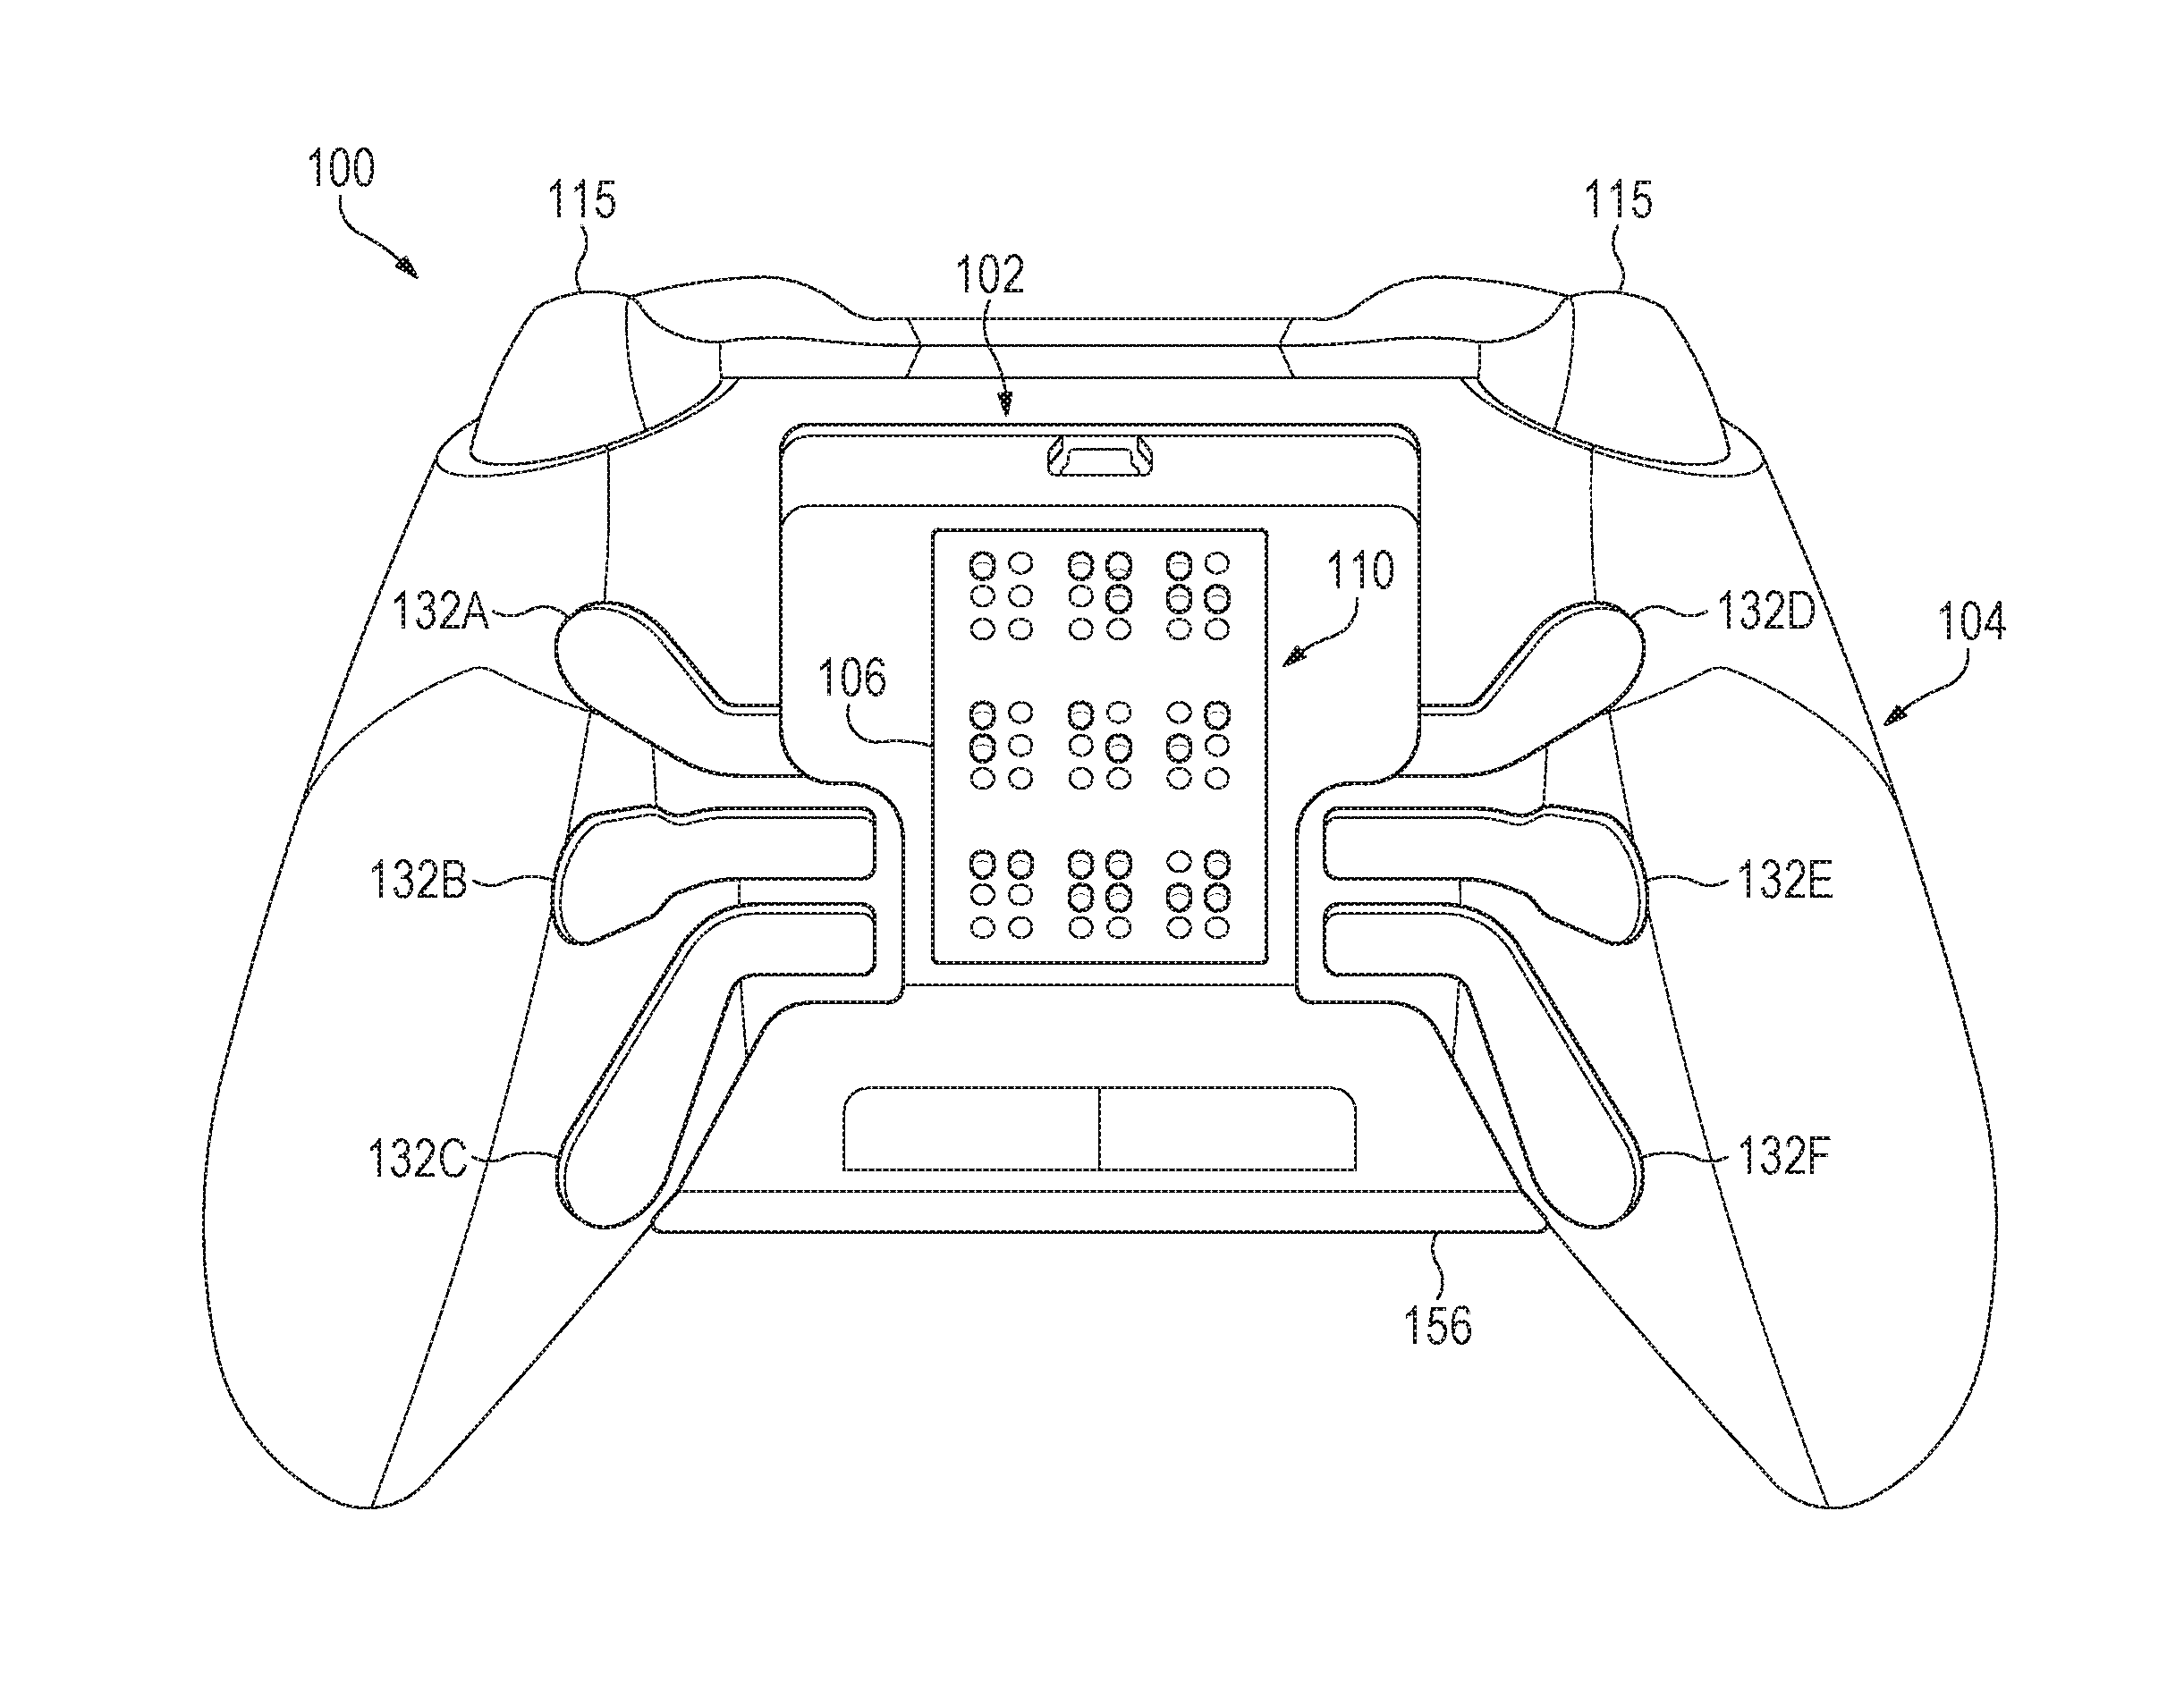 Xbox 360 Controller Dimensions & Drawings